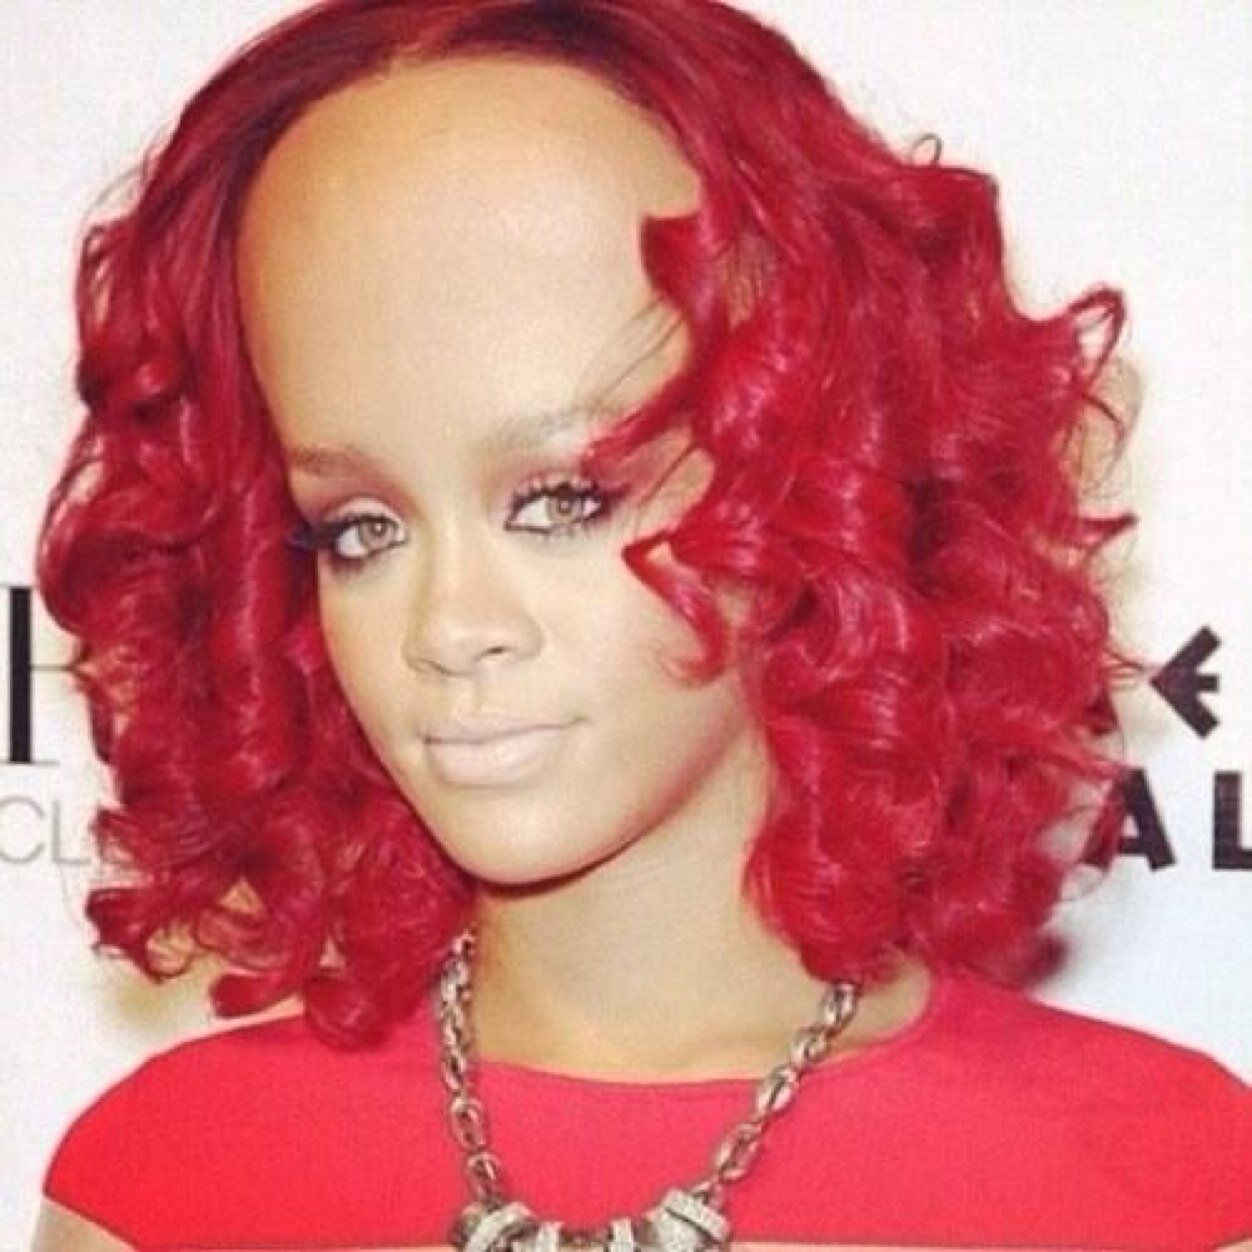 her forehead is giving.